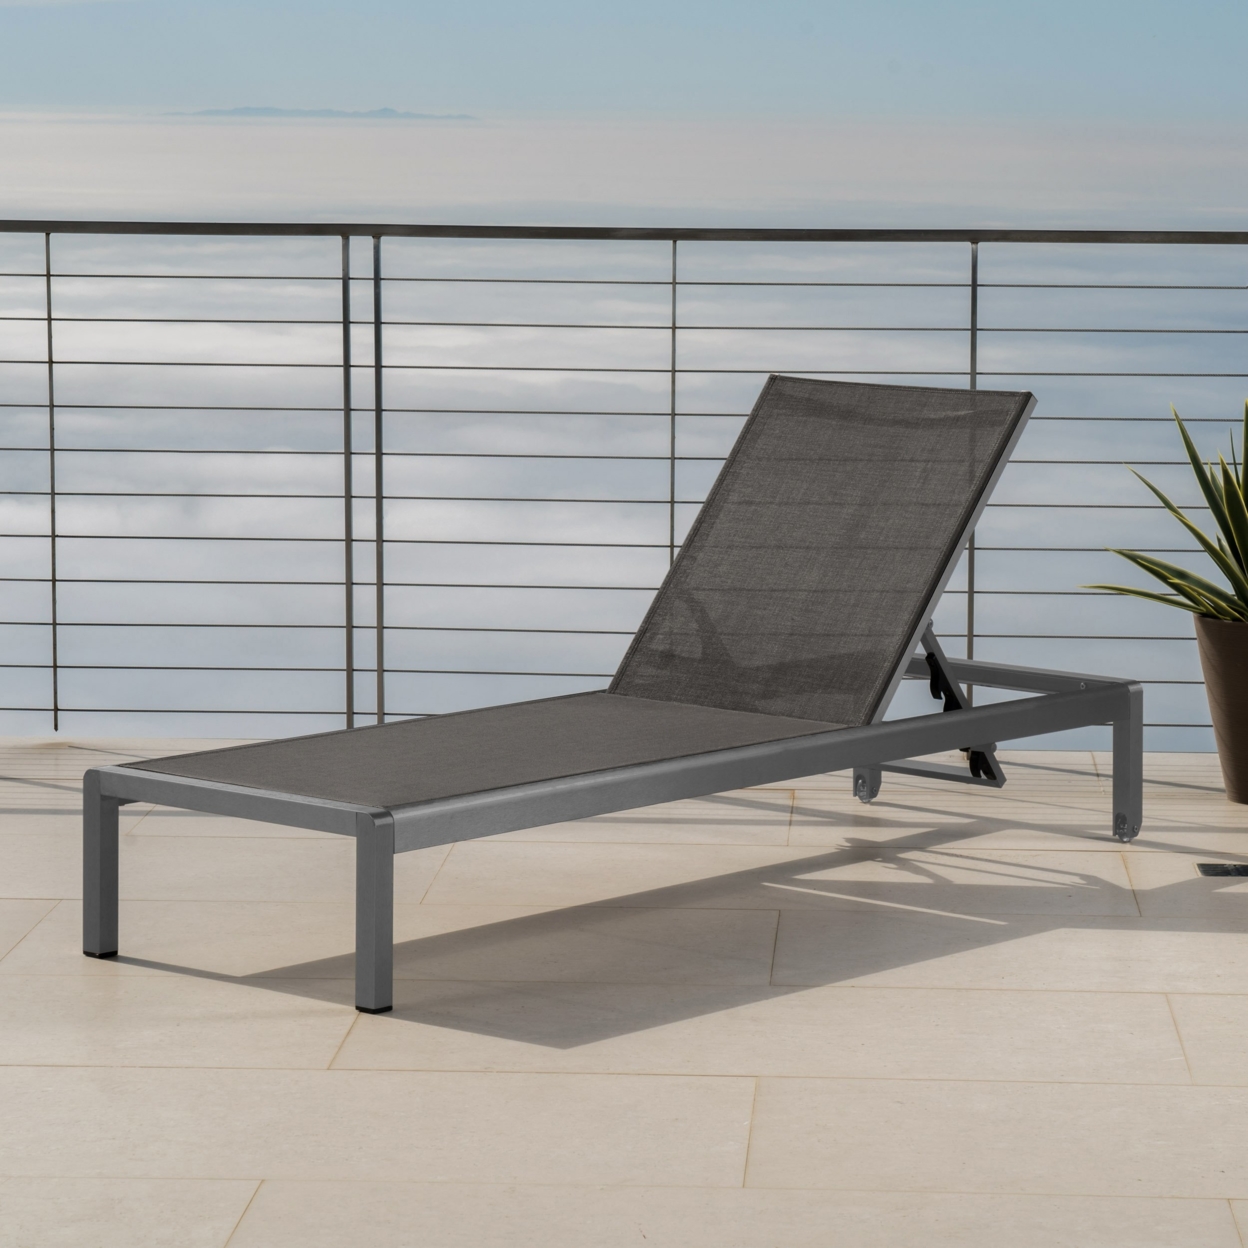 Crested Bay Outdoor Grey Aluminum Chaise Lounge With Dark Grey Mesh Seat - Grey, Set Of 2